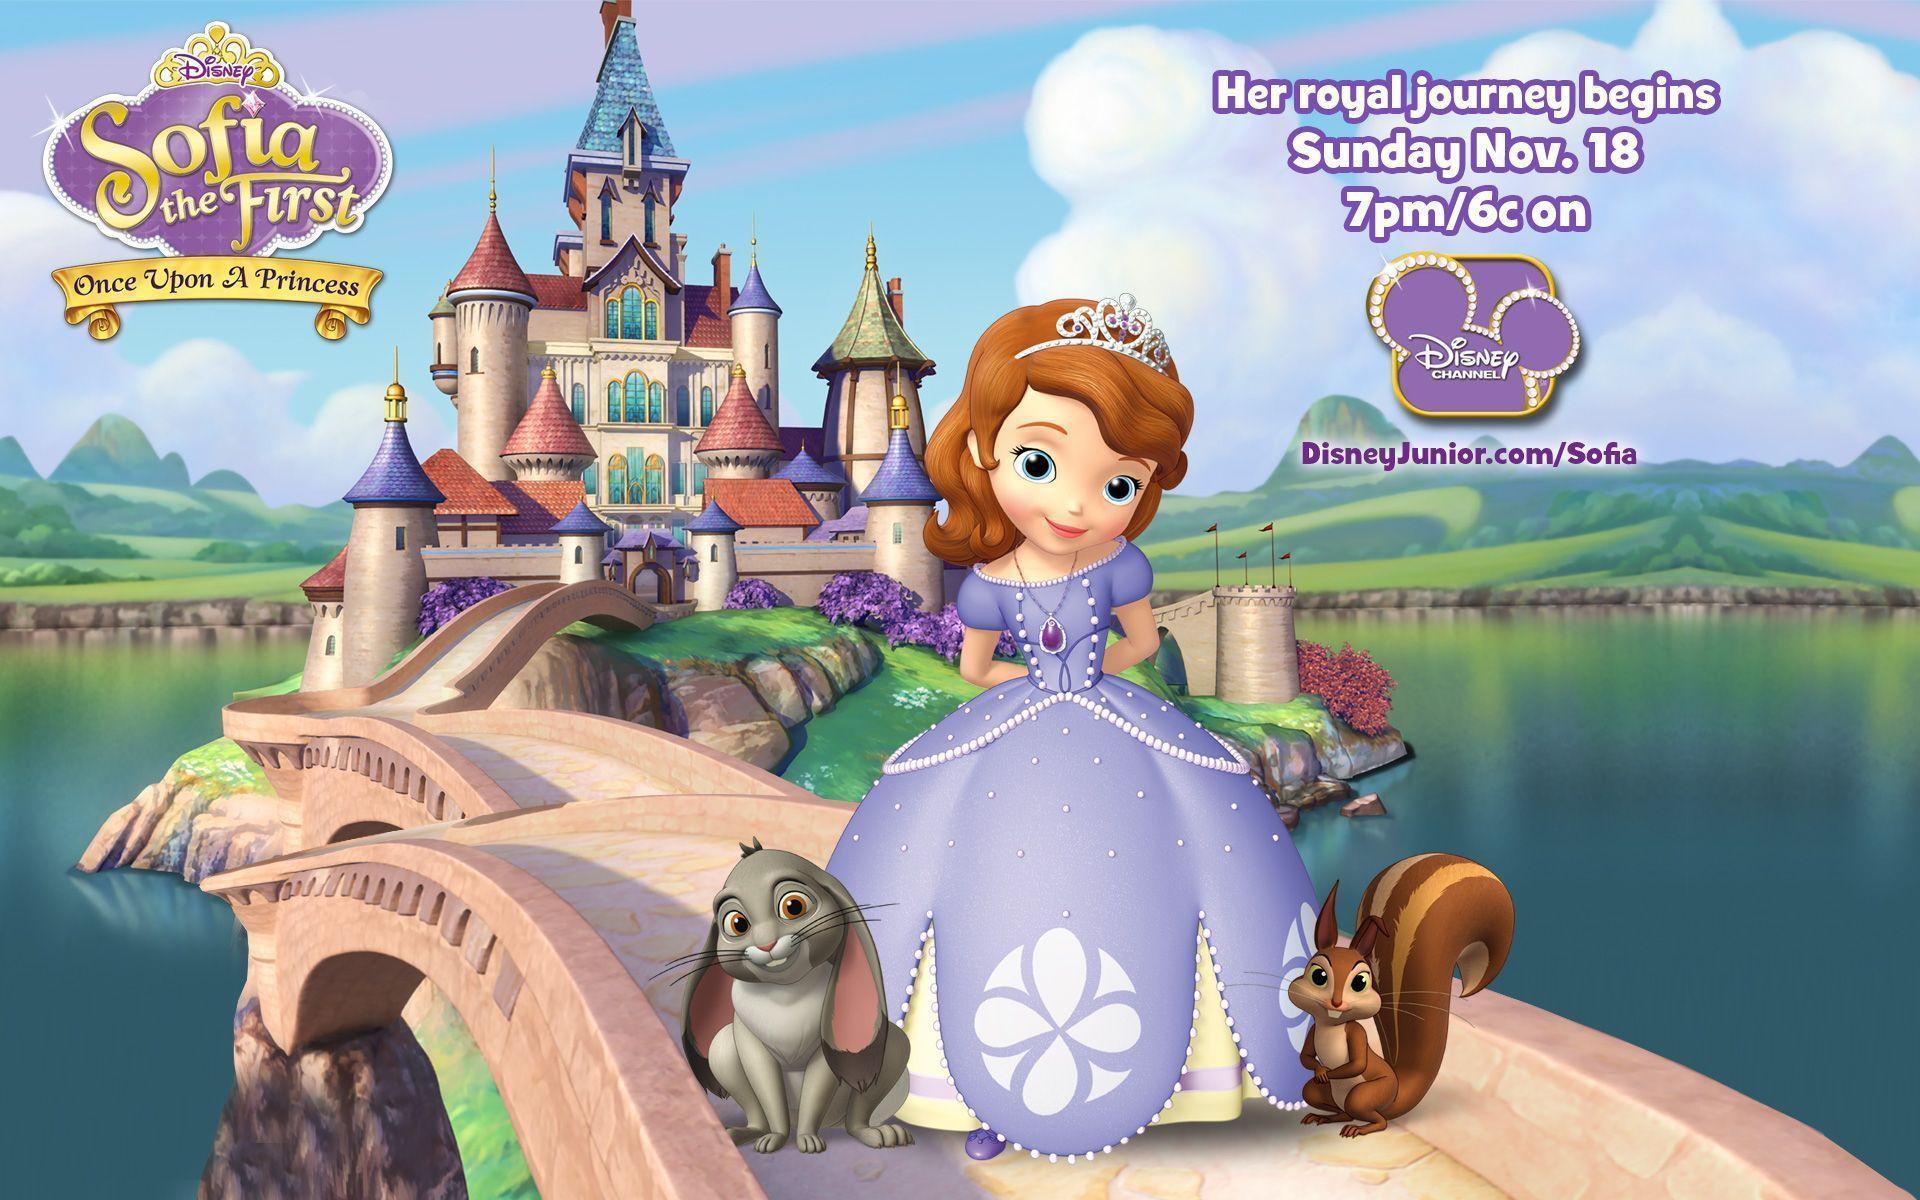 Sofia the First&; to Premiere November 18 on Disney Channel